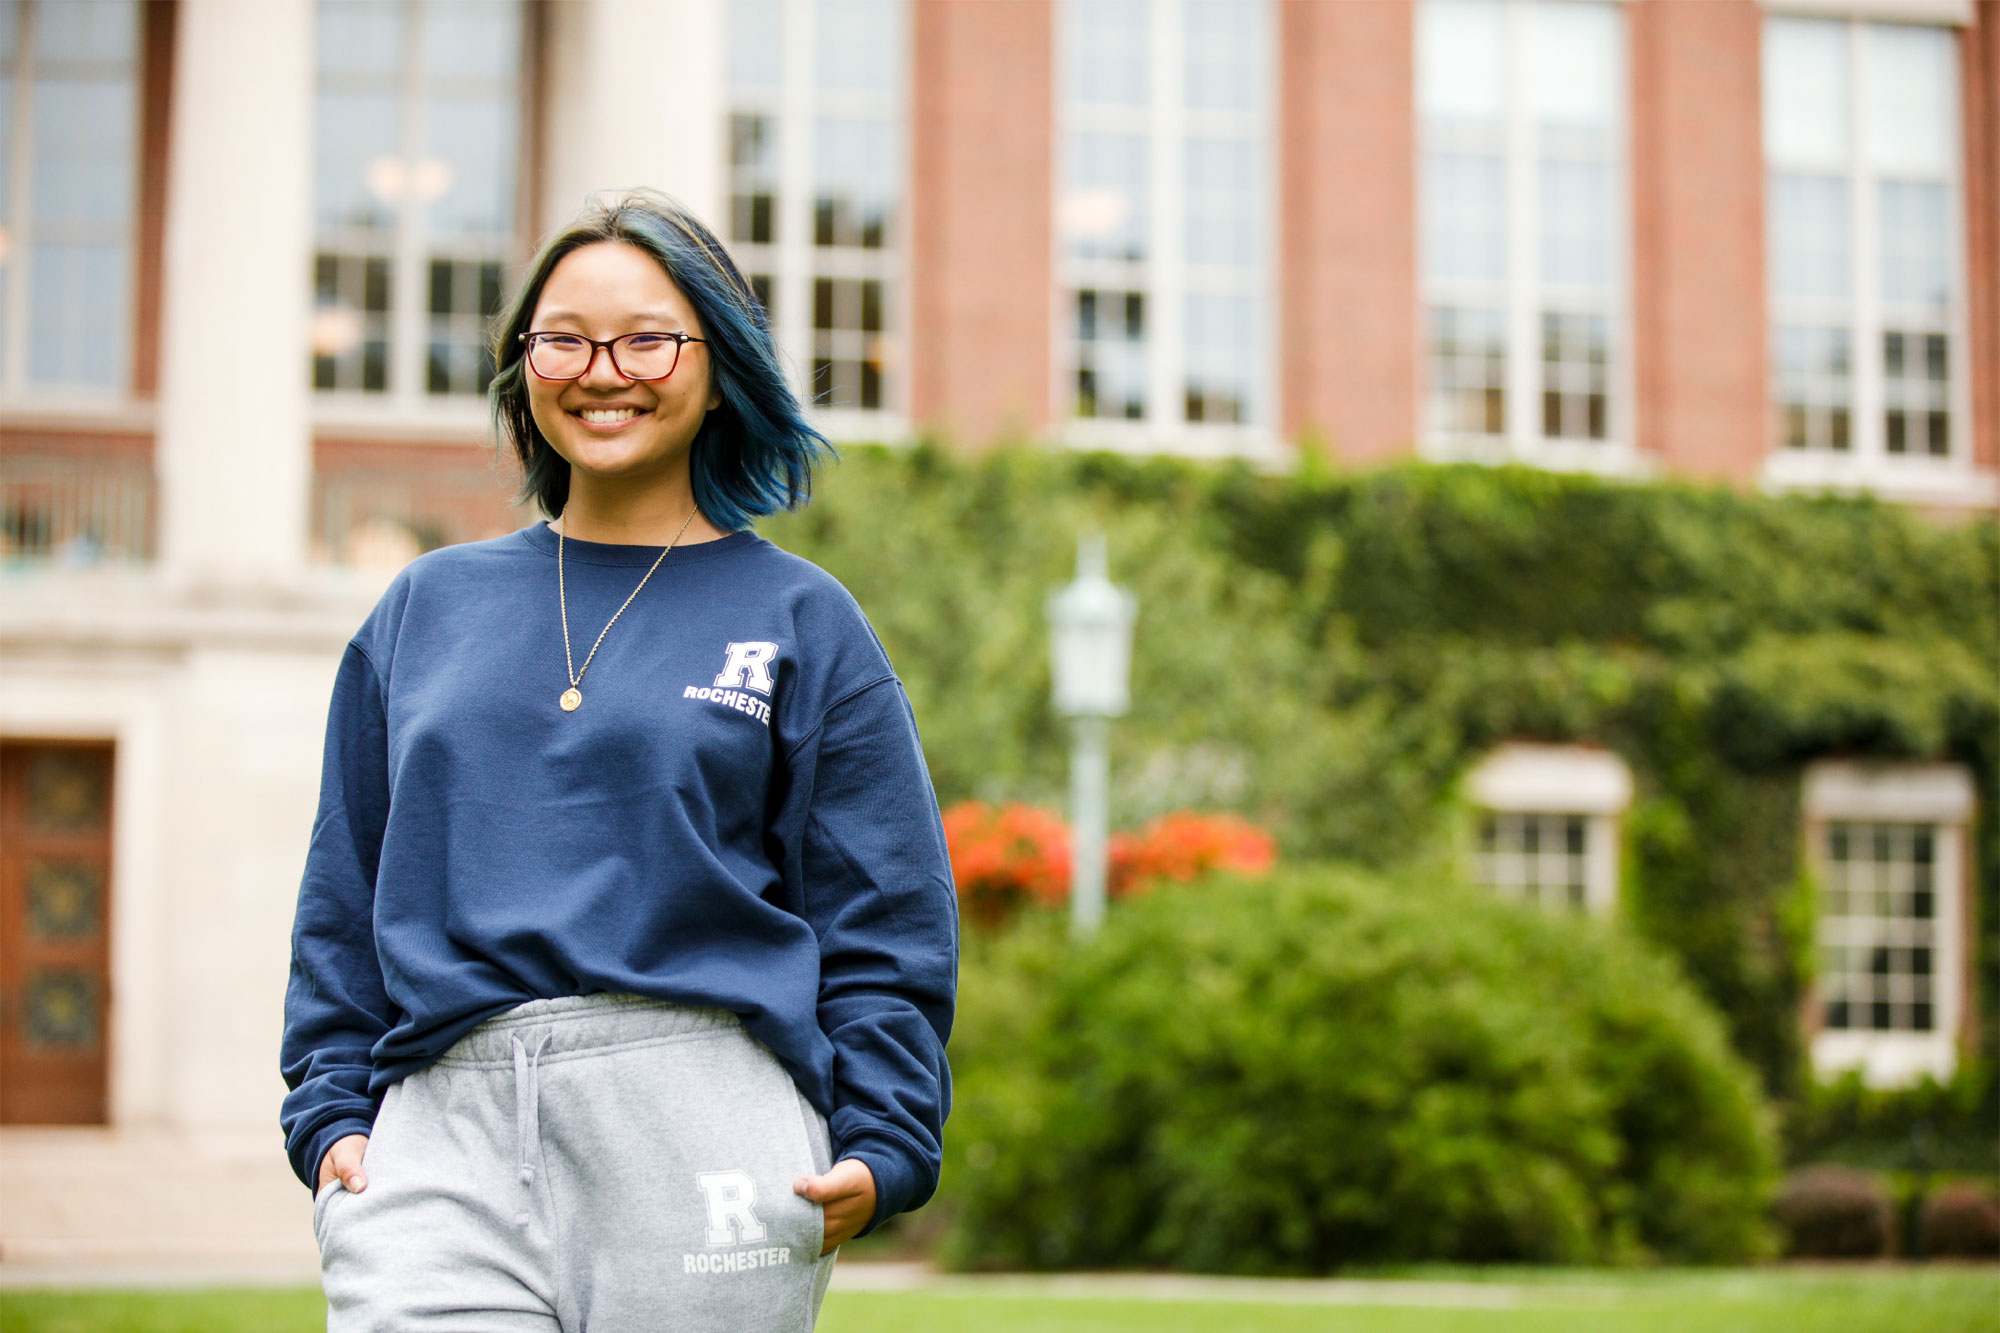 student stands in front of Rush Rhees wearing sweatshirt and sweatpants